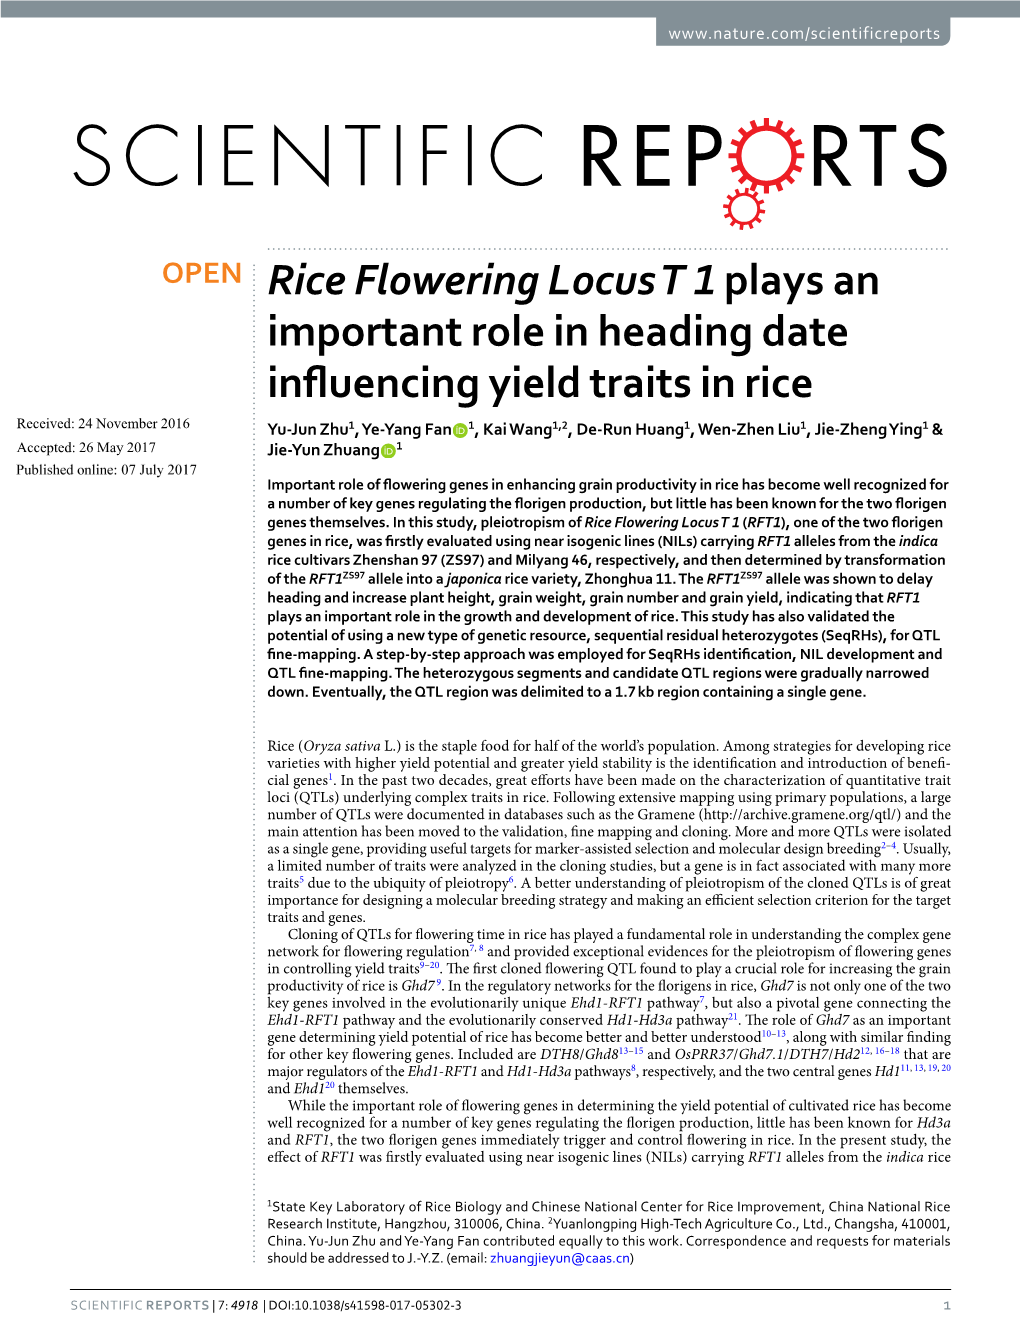 Rice Flowering Locus T 1 Plays an Important Role in Heading Date